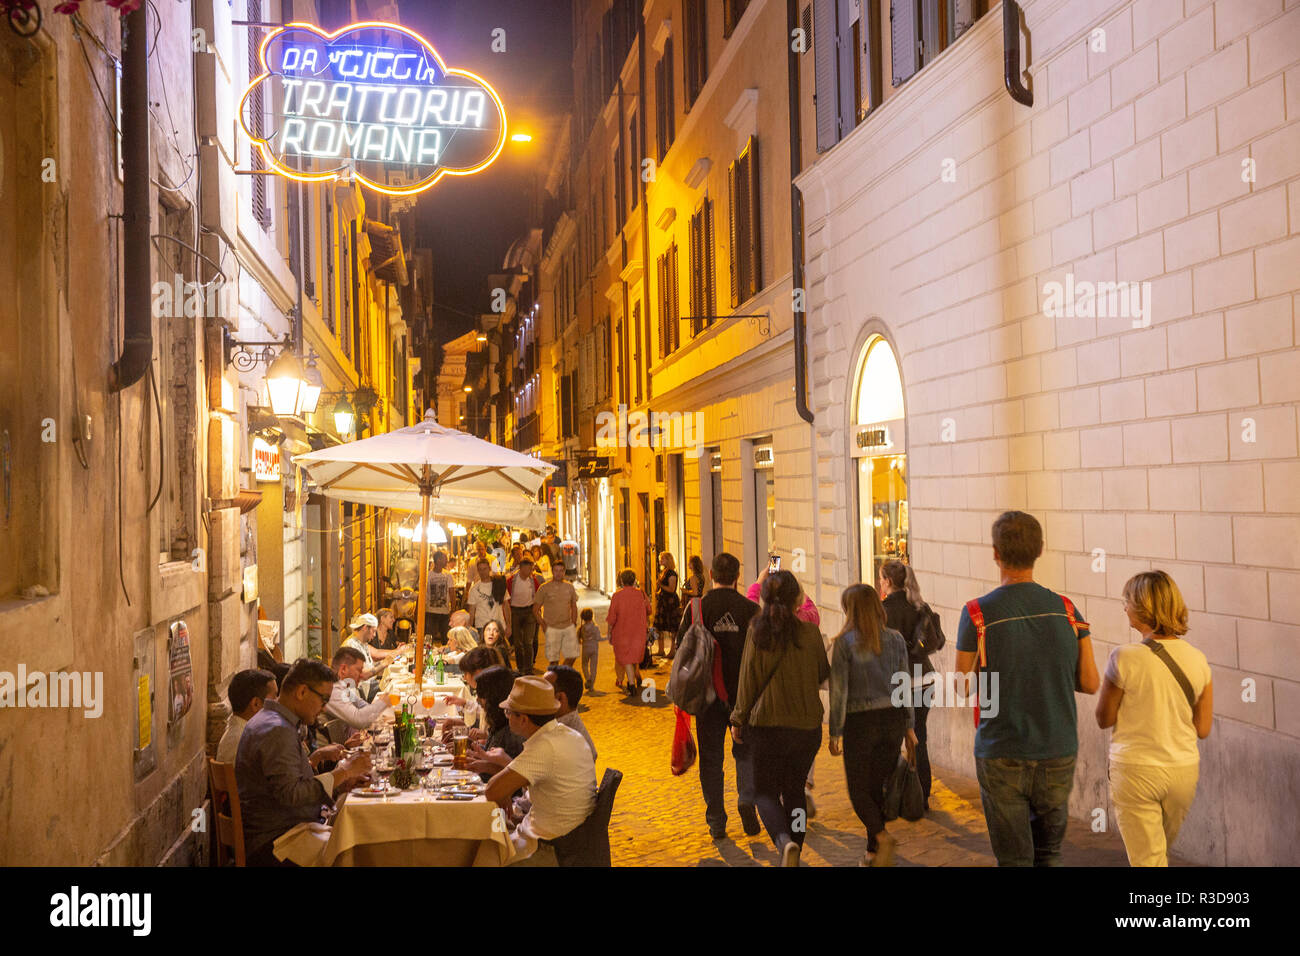 Street night scene in Rome city centre with people having dinner, Italy,Europe, people eating at an Italian Trattoria,2018 Stock Photo